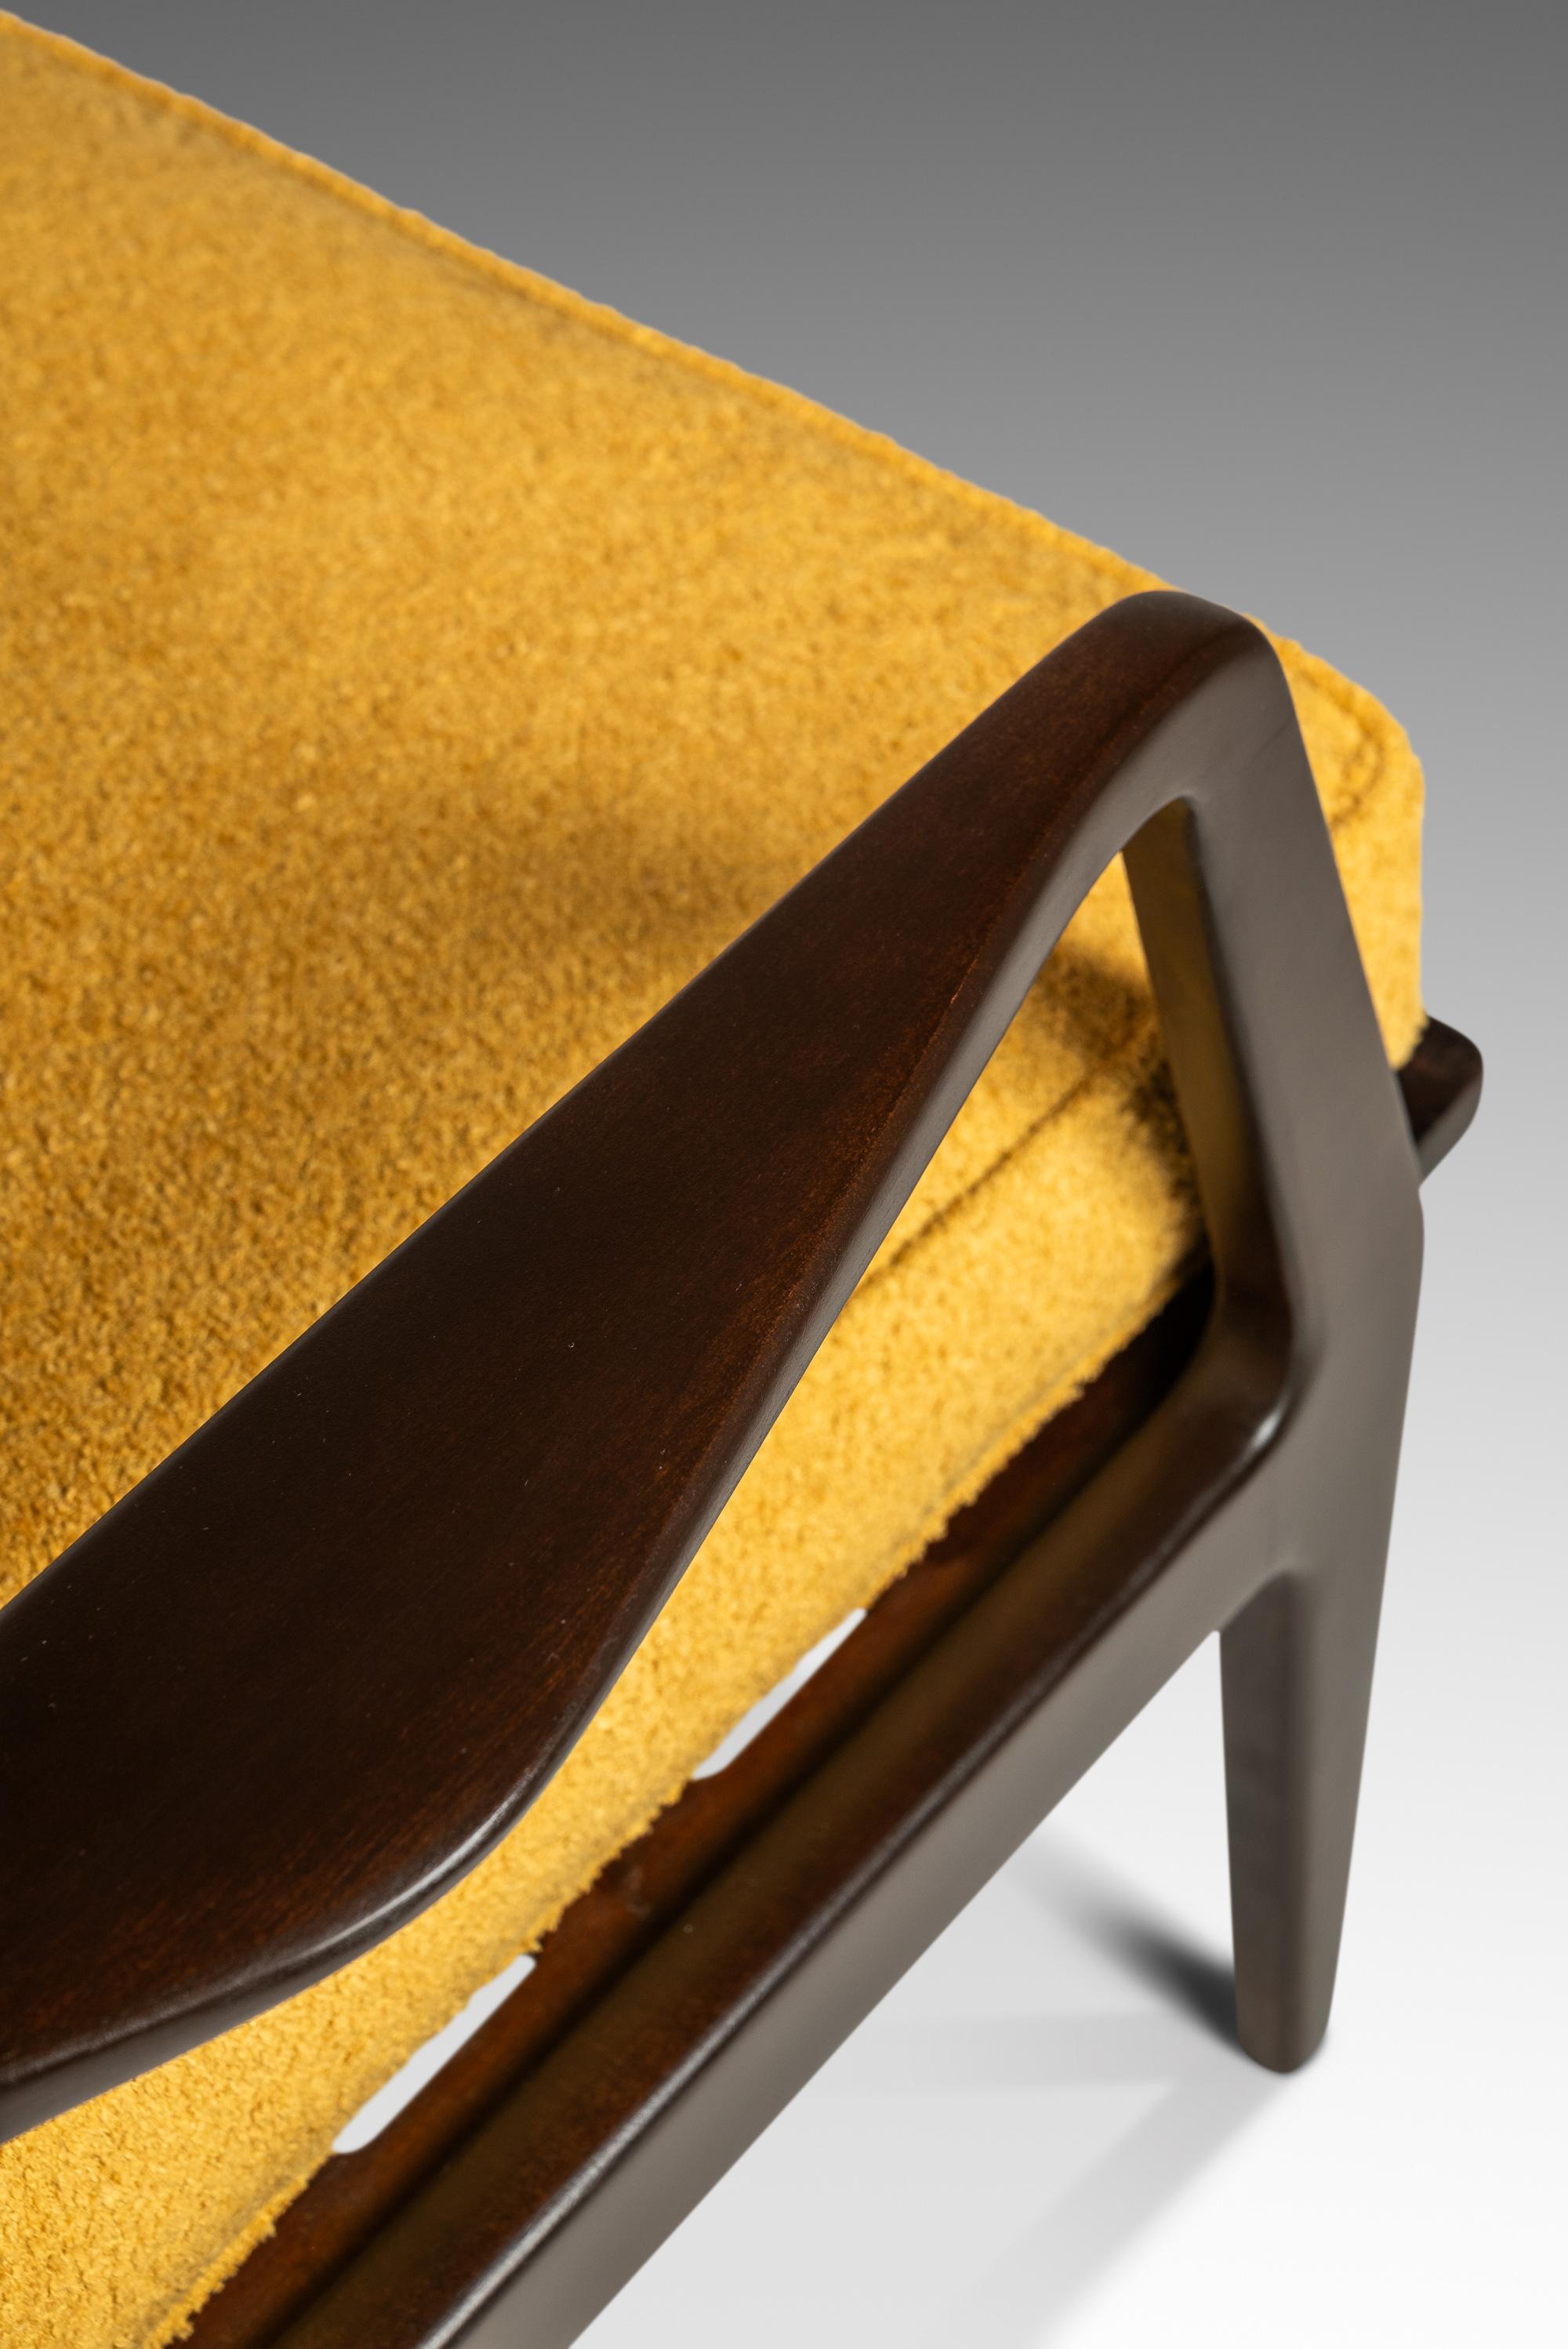 Model 596 Lounge Chair by Lawrence Peabody & Ib Kofod Larsen for Selig, c. 1950s For Sale 7